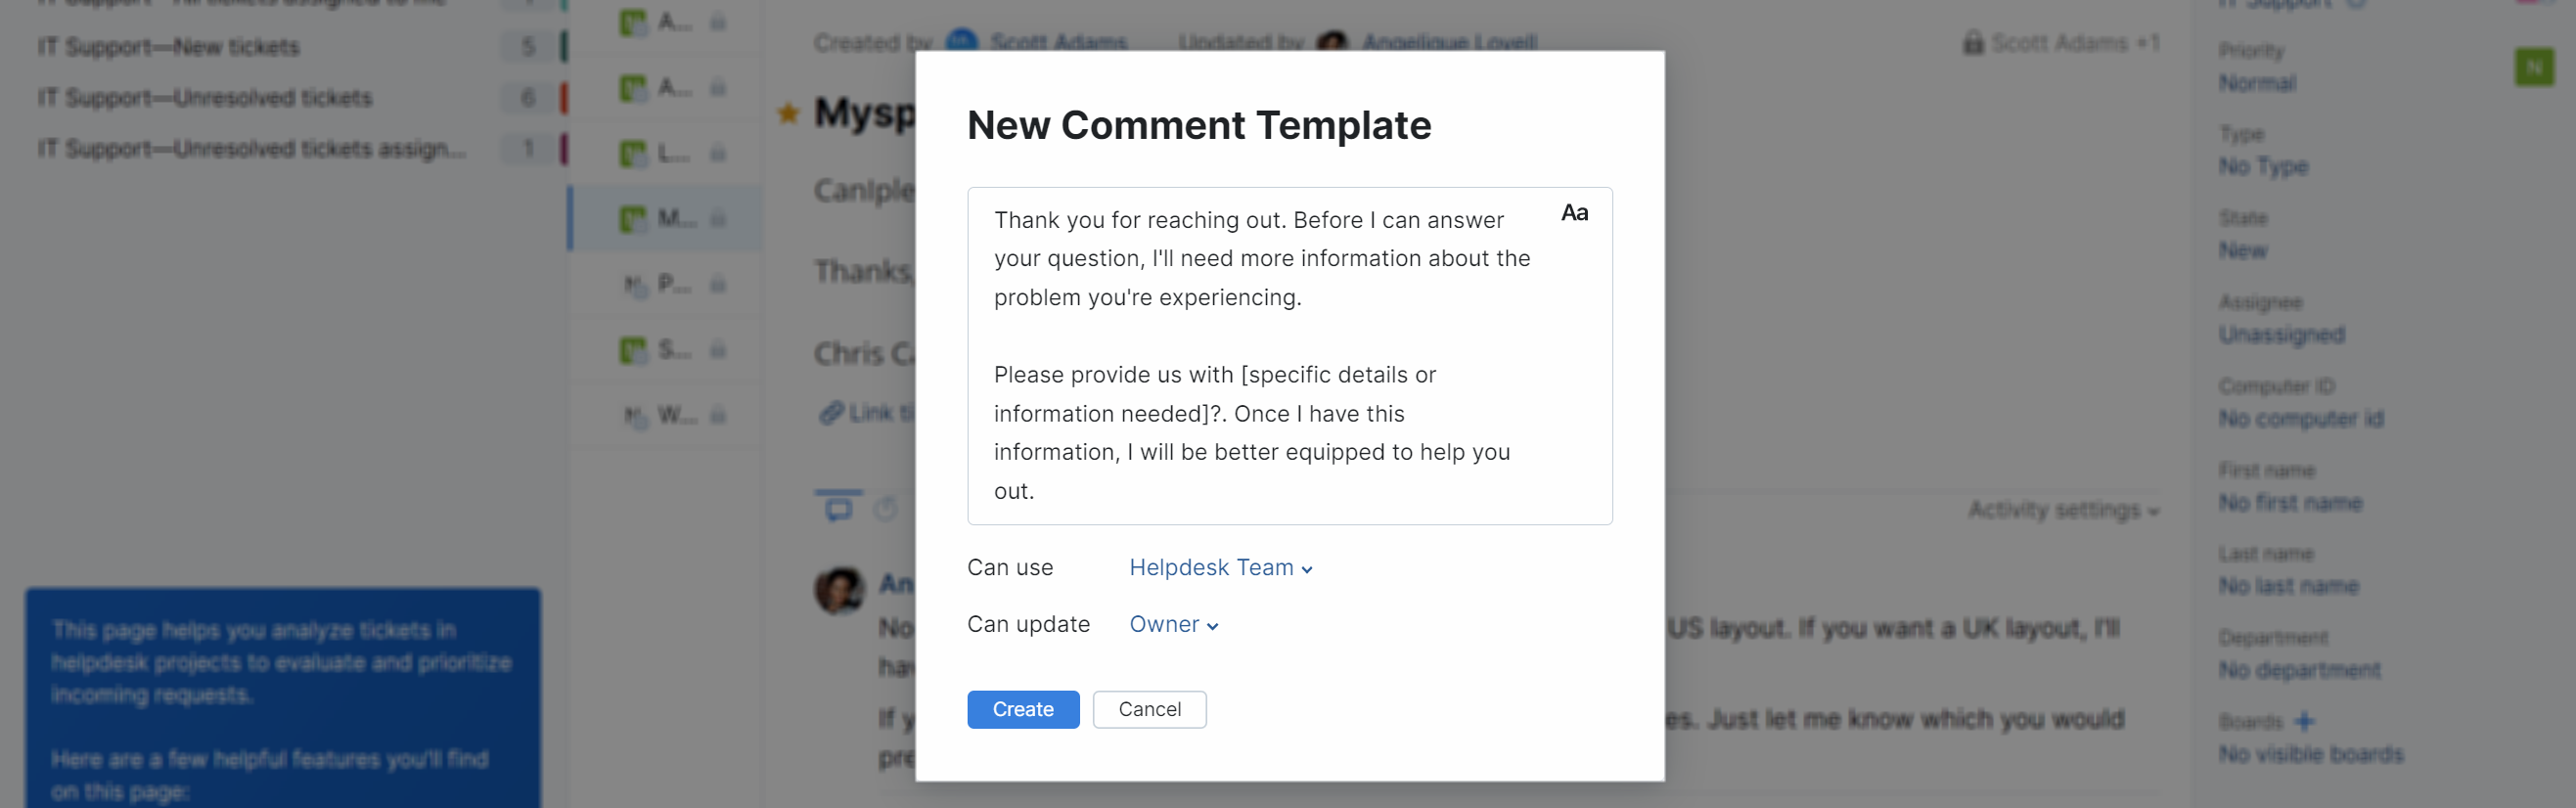 The New Comment Template dialog.